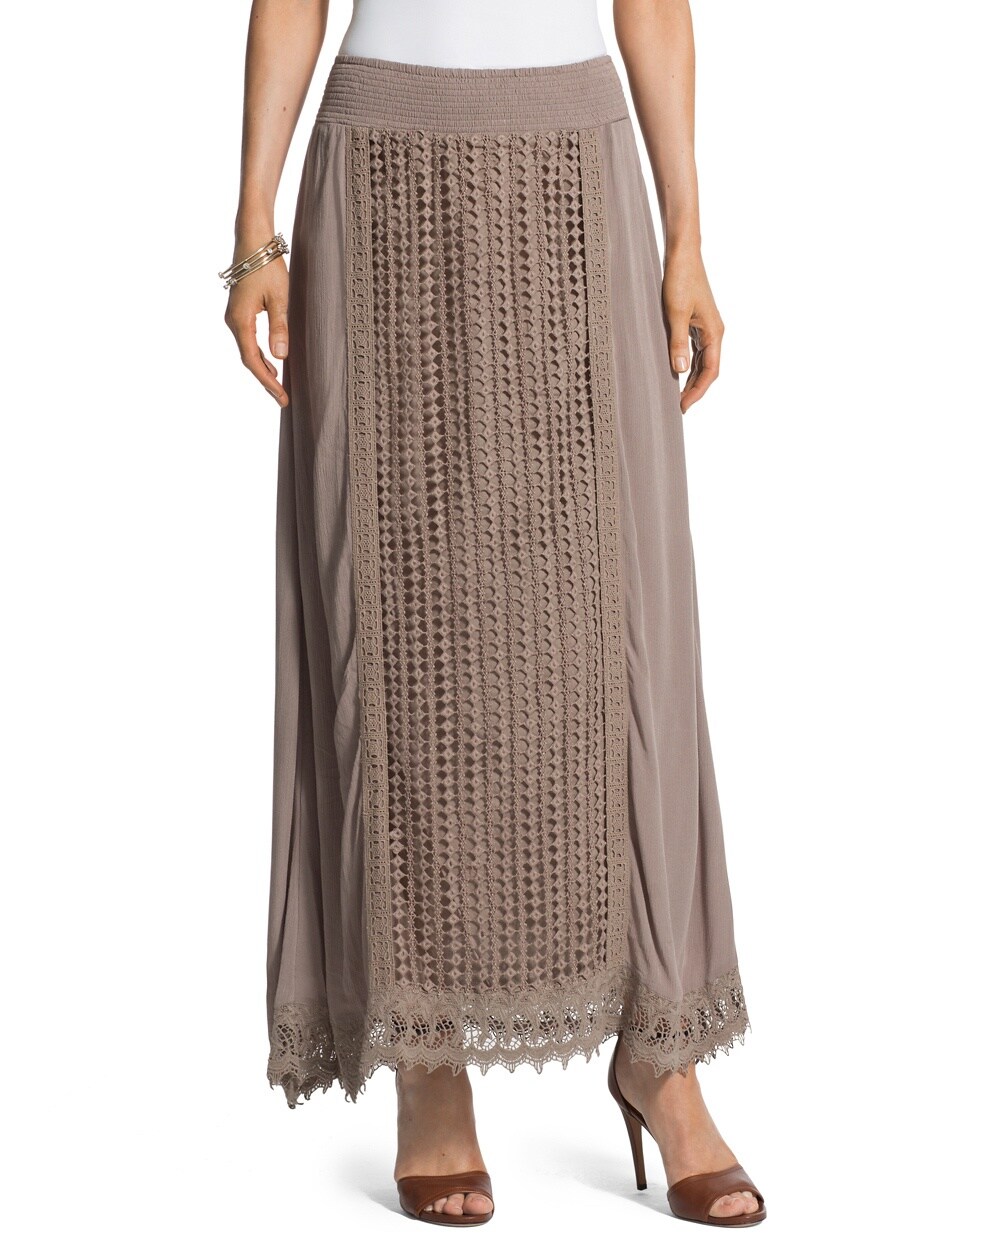 Crocheted Lace Maxi Skirt